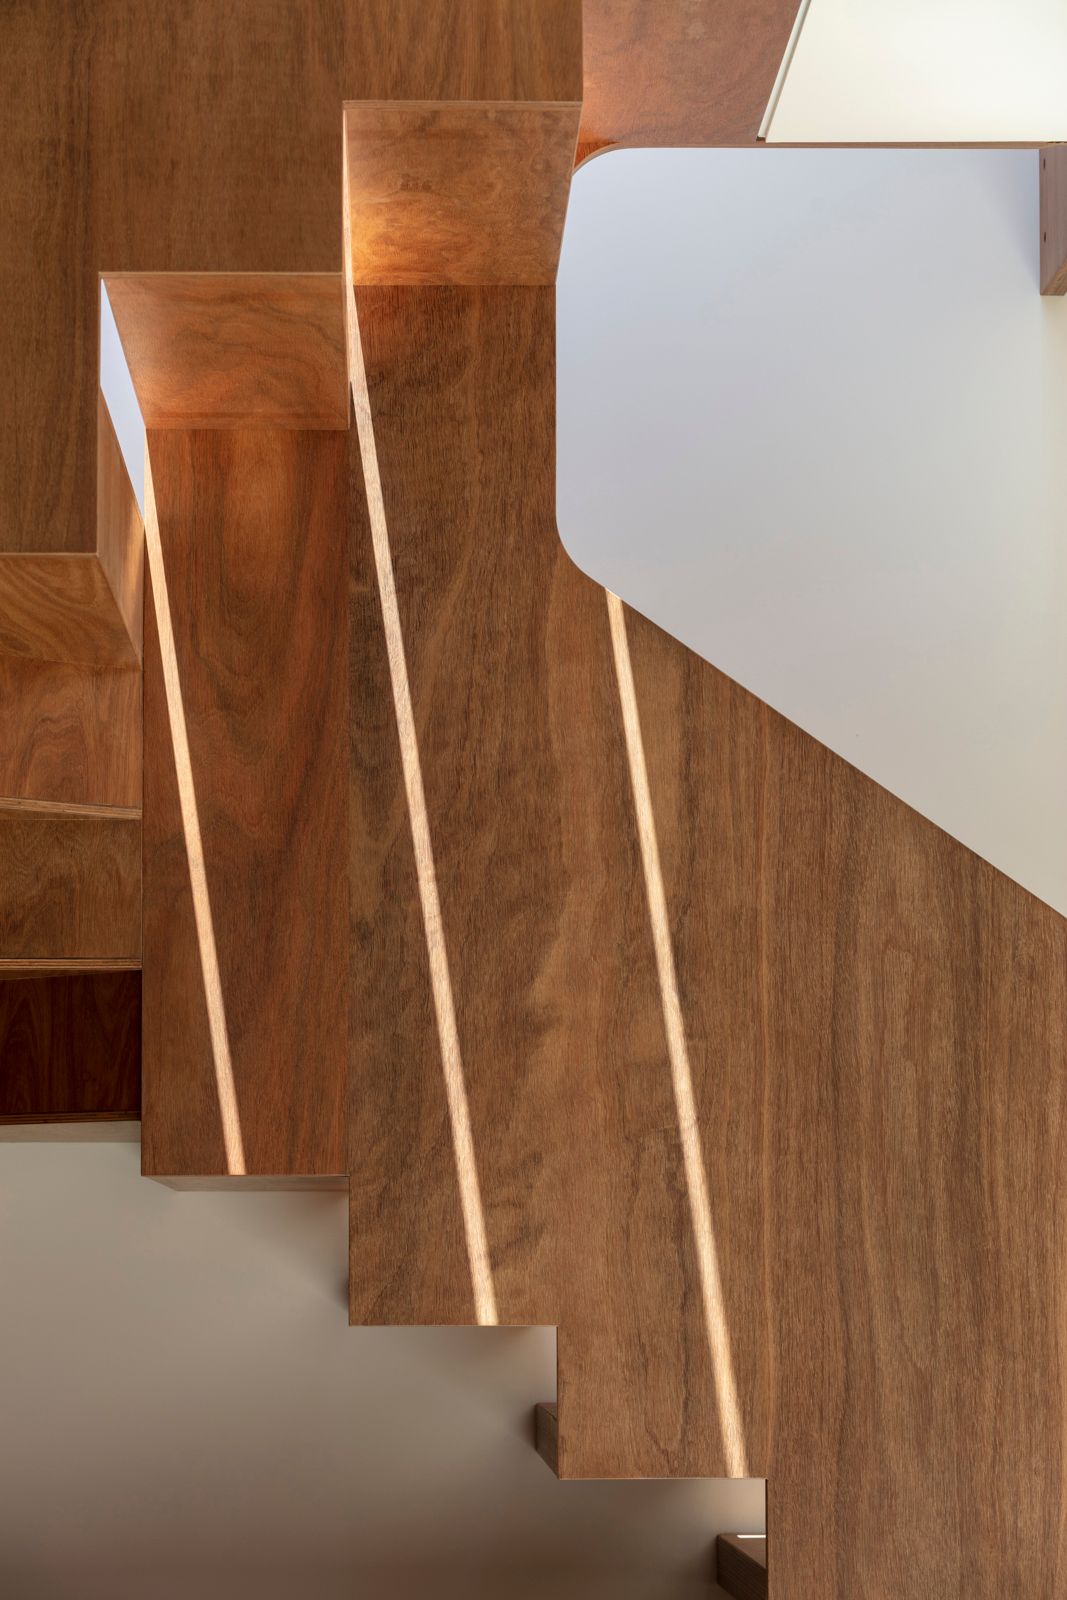 Sky House by Marra+Yeh Architects showing shadow play on feature stair